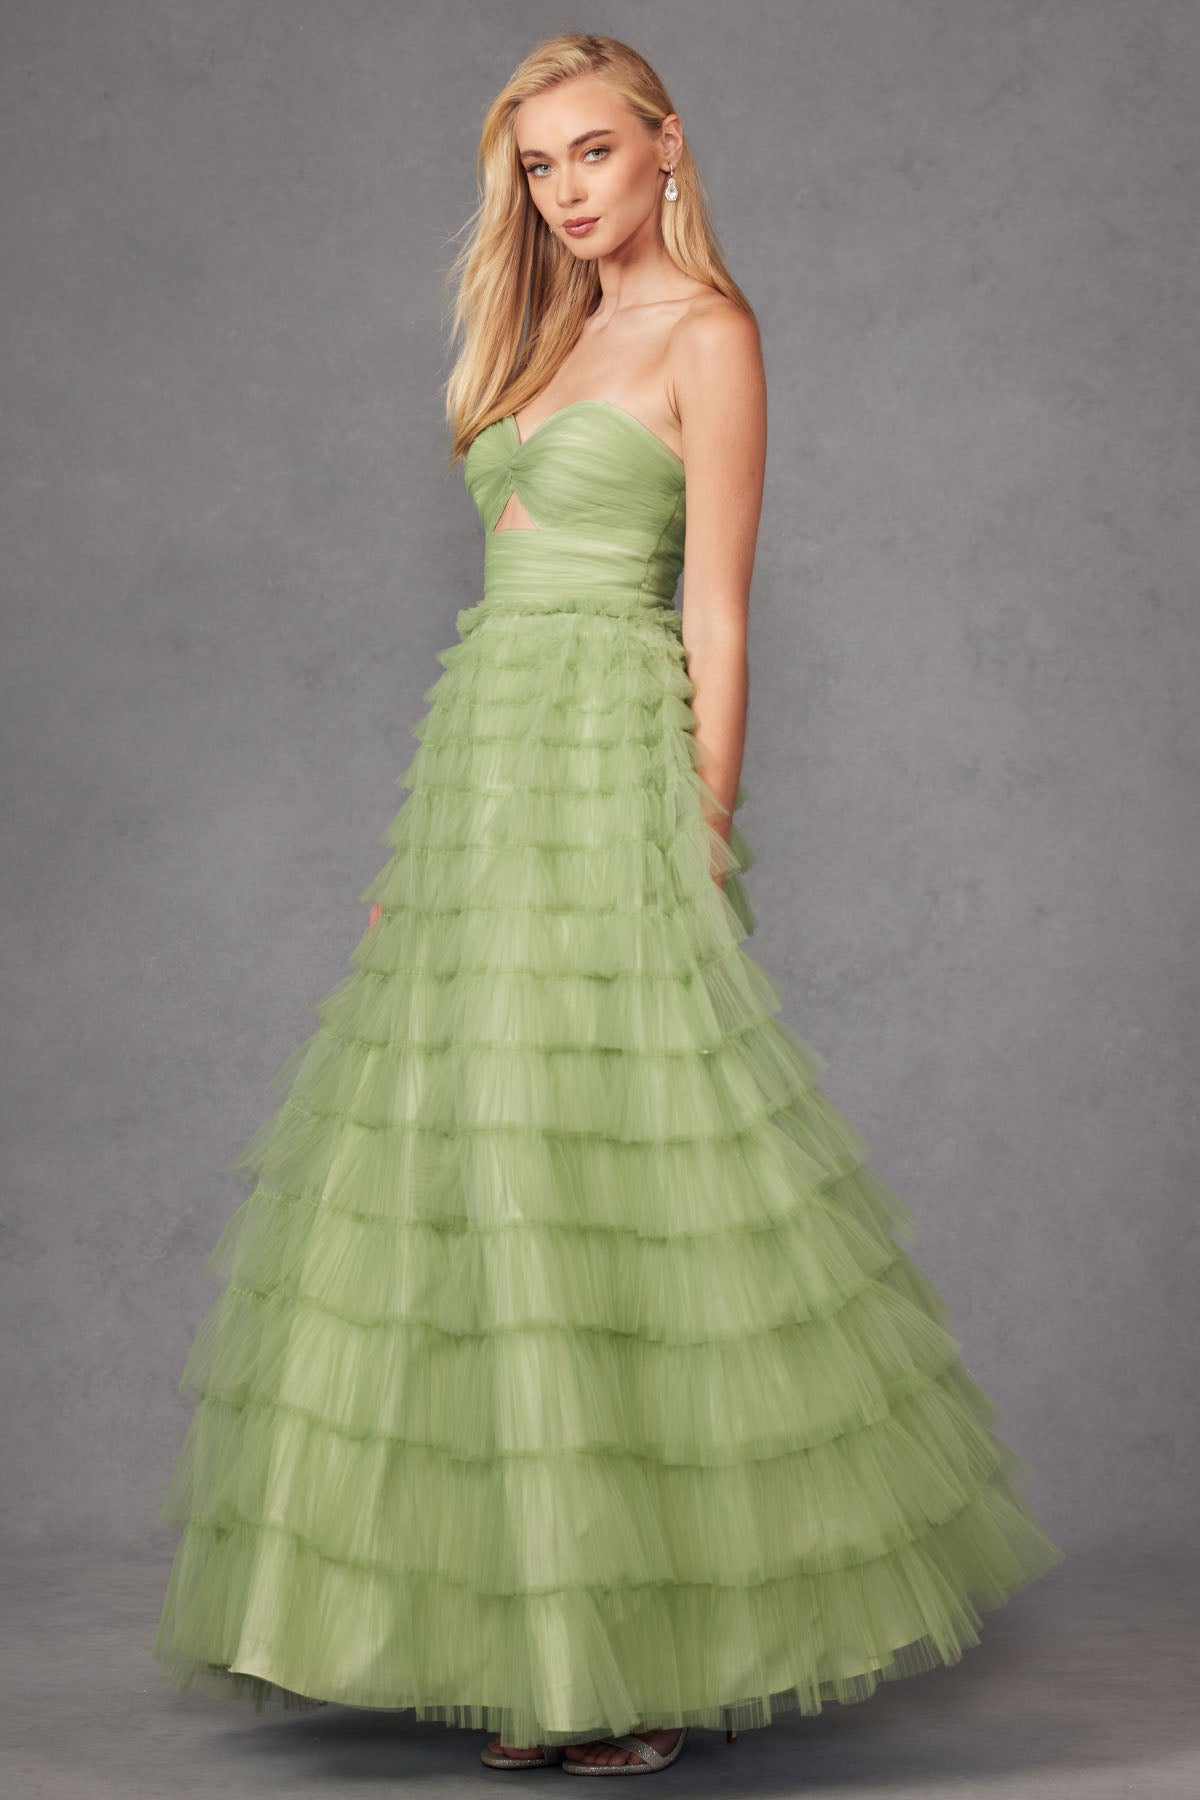 JT24-2456H Tiers Layers Ruffles Strapless Ball Gown With Keyholes Front Lace Up Zipper Closure